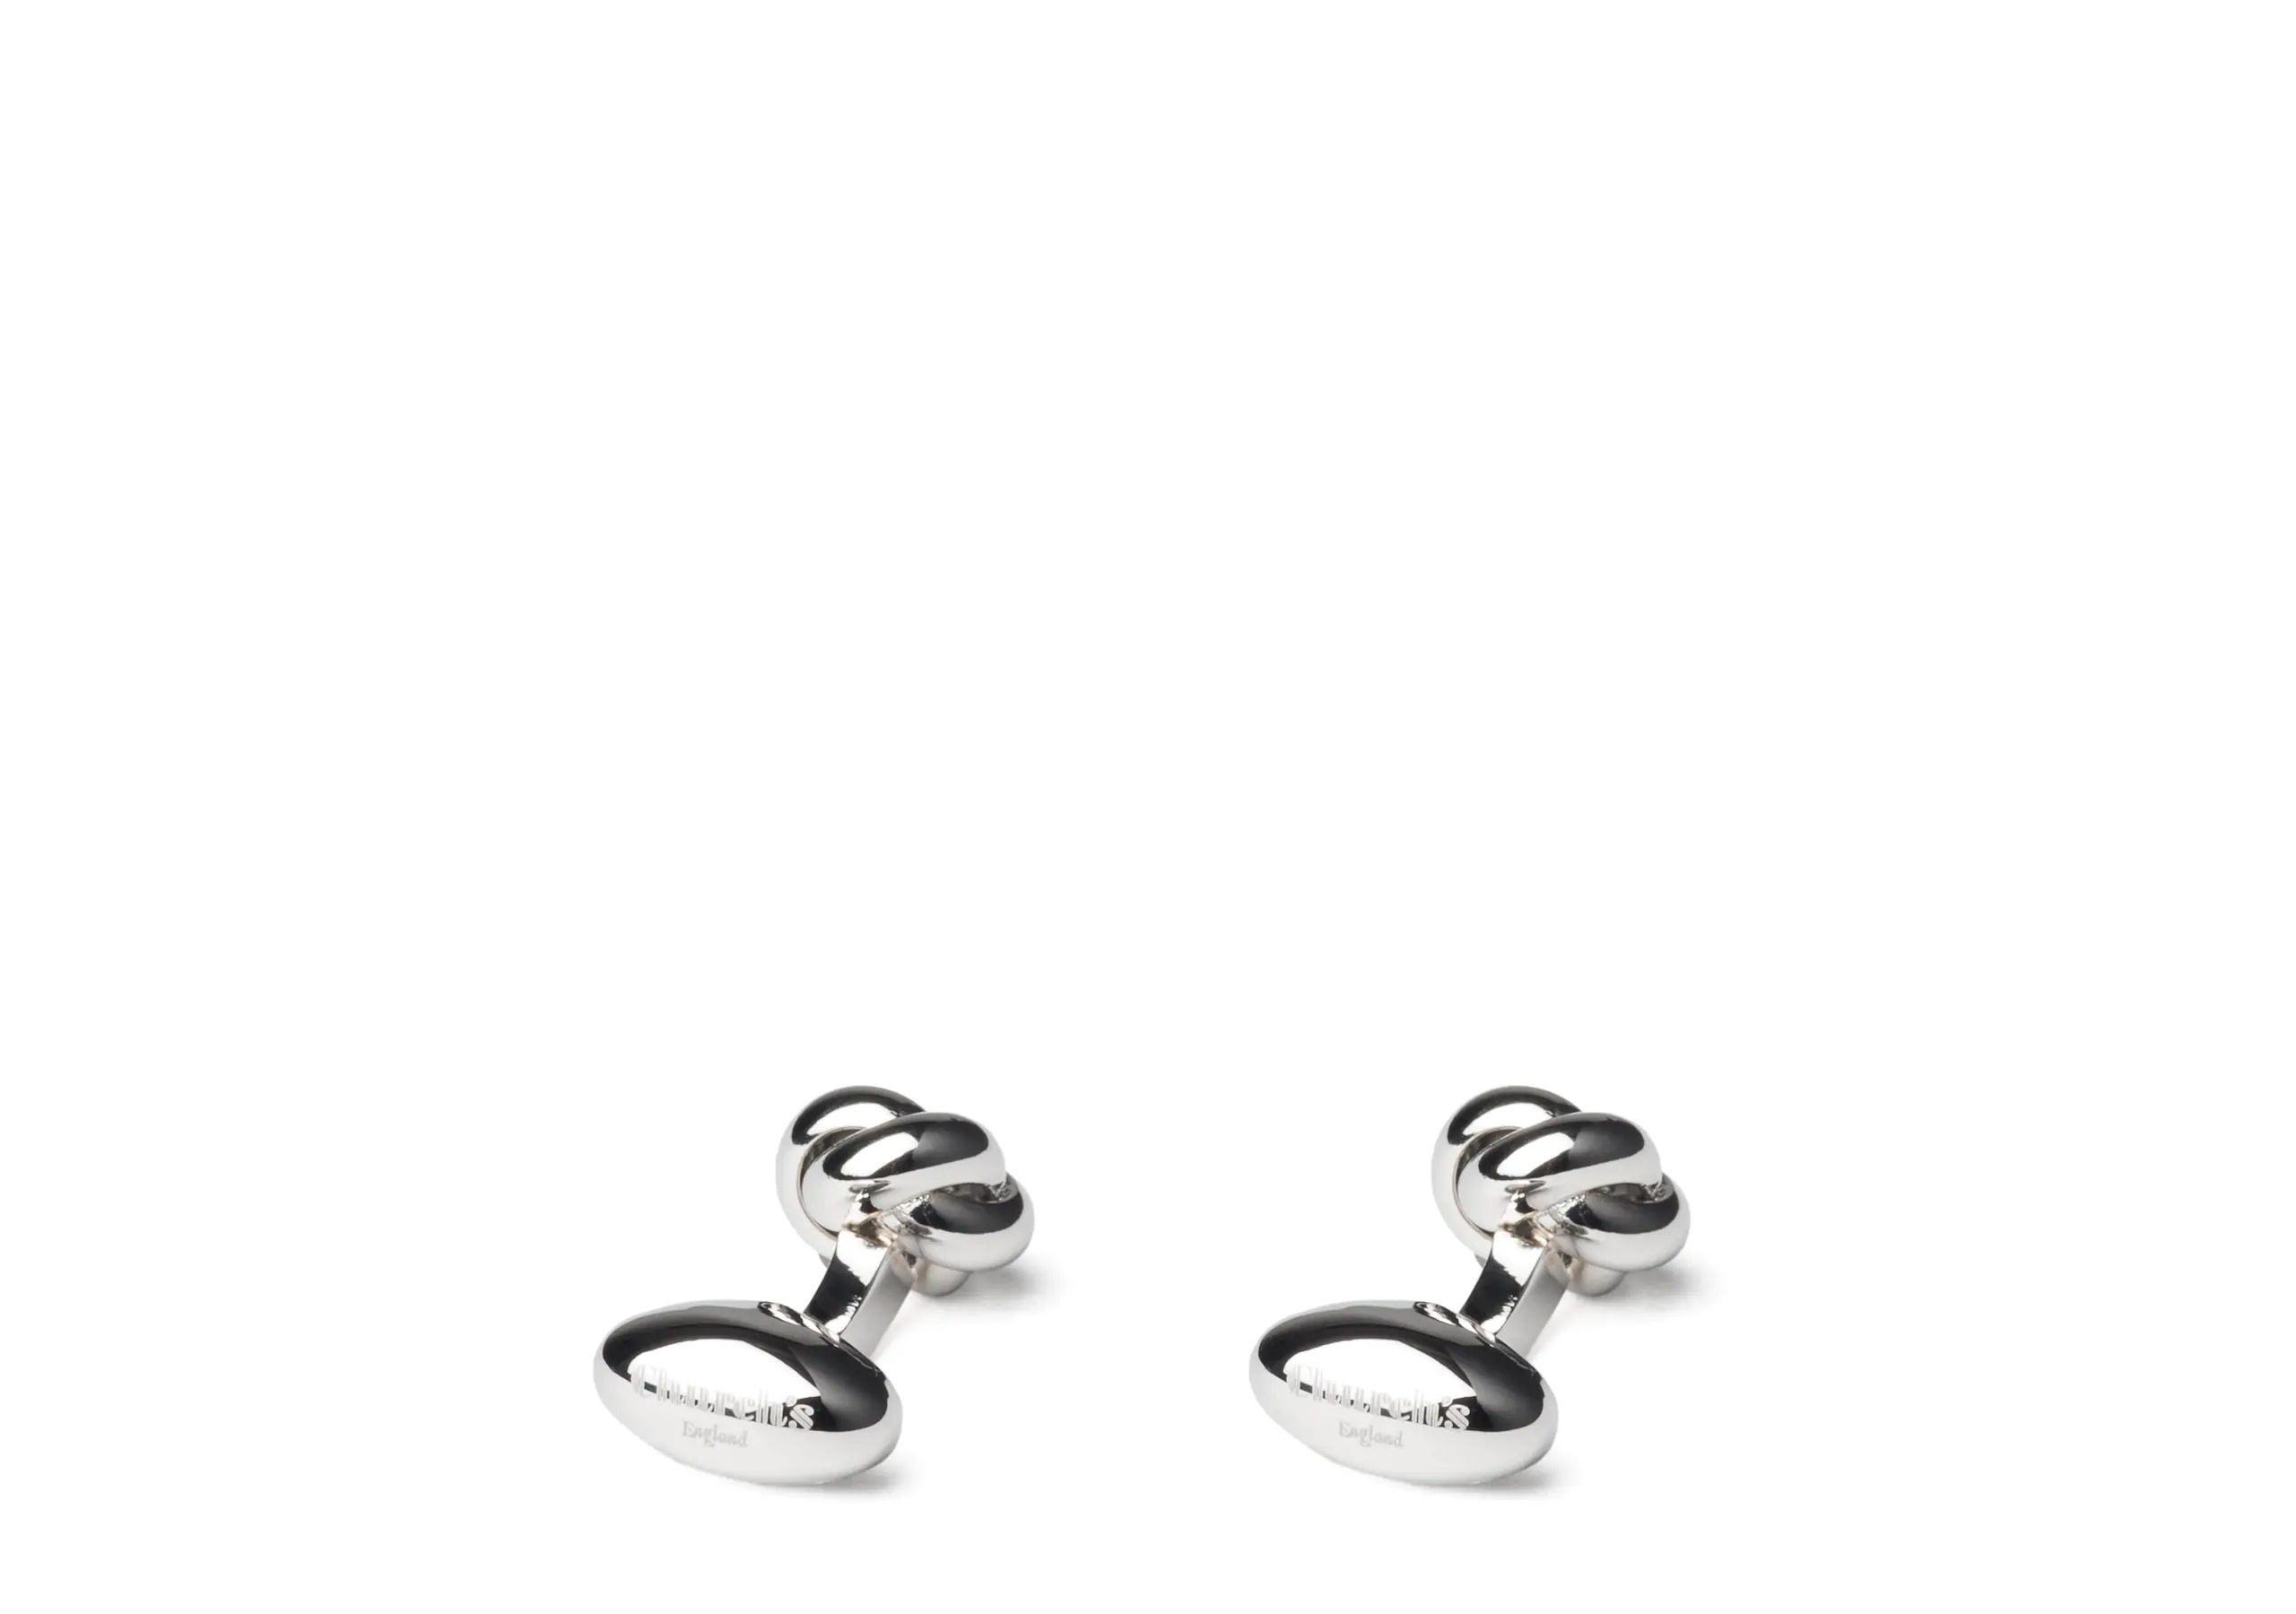 Knotted cufflink
Rhodium Plated Knot Silver - 2